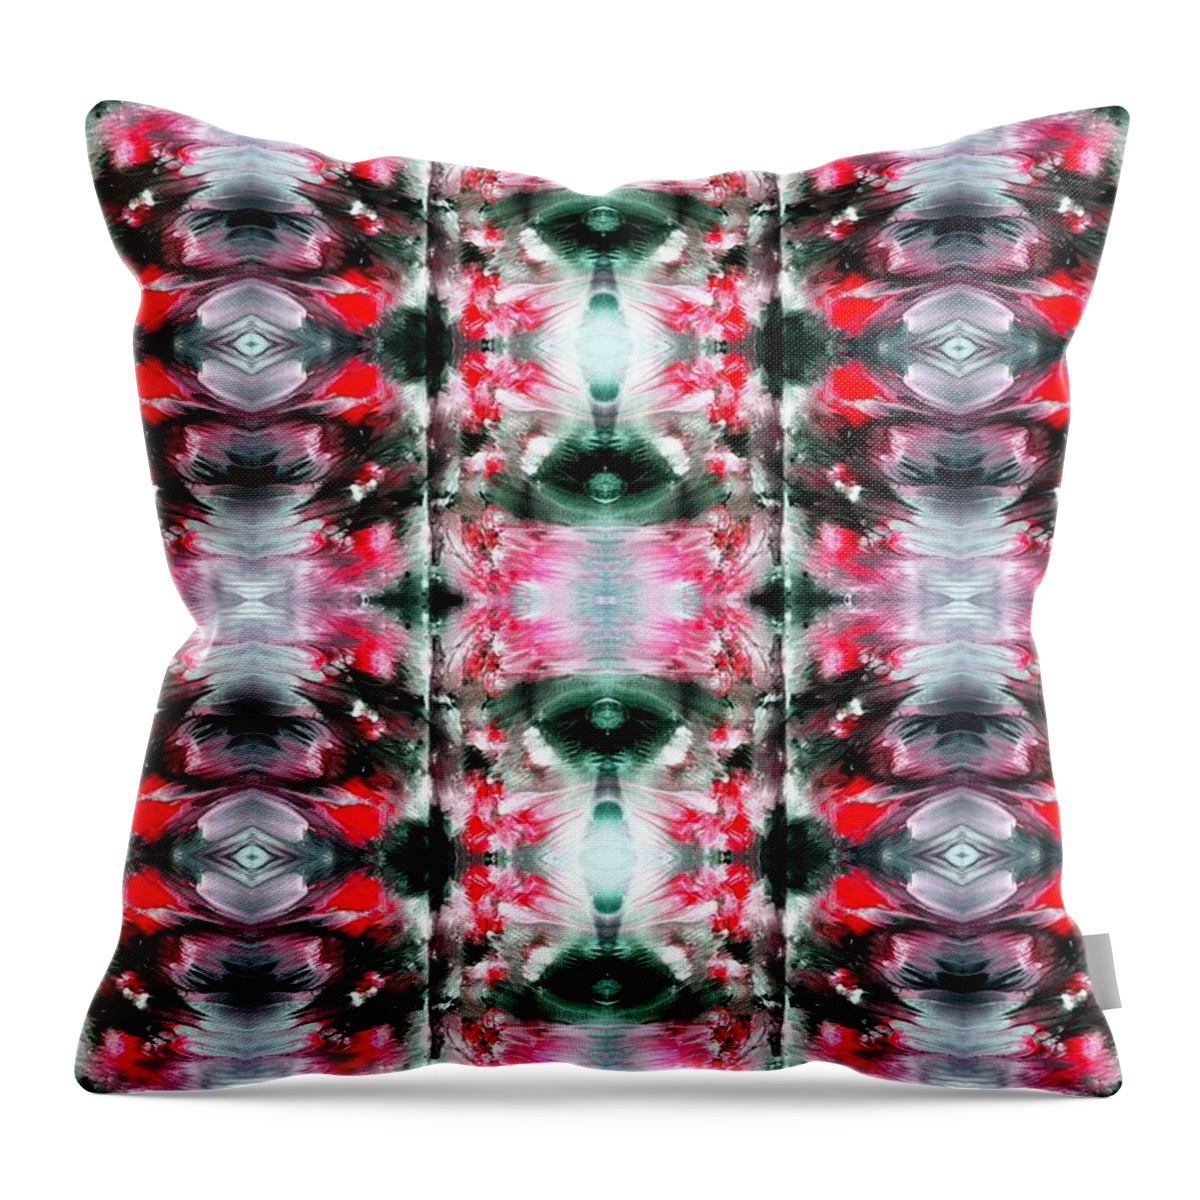 Kaleidoscope Throw Pillow featuring the digital art Red and black by Sumit Mehndiratta